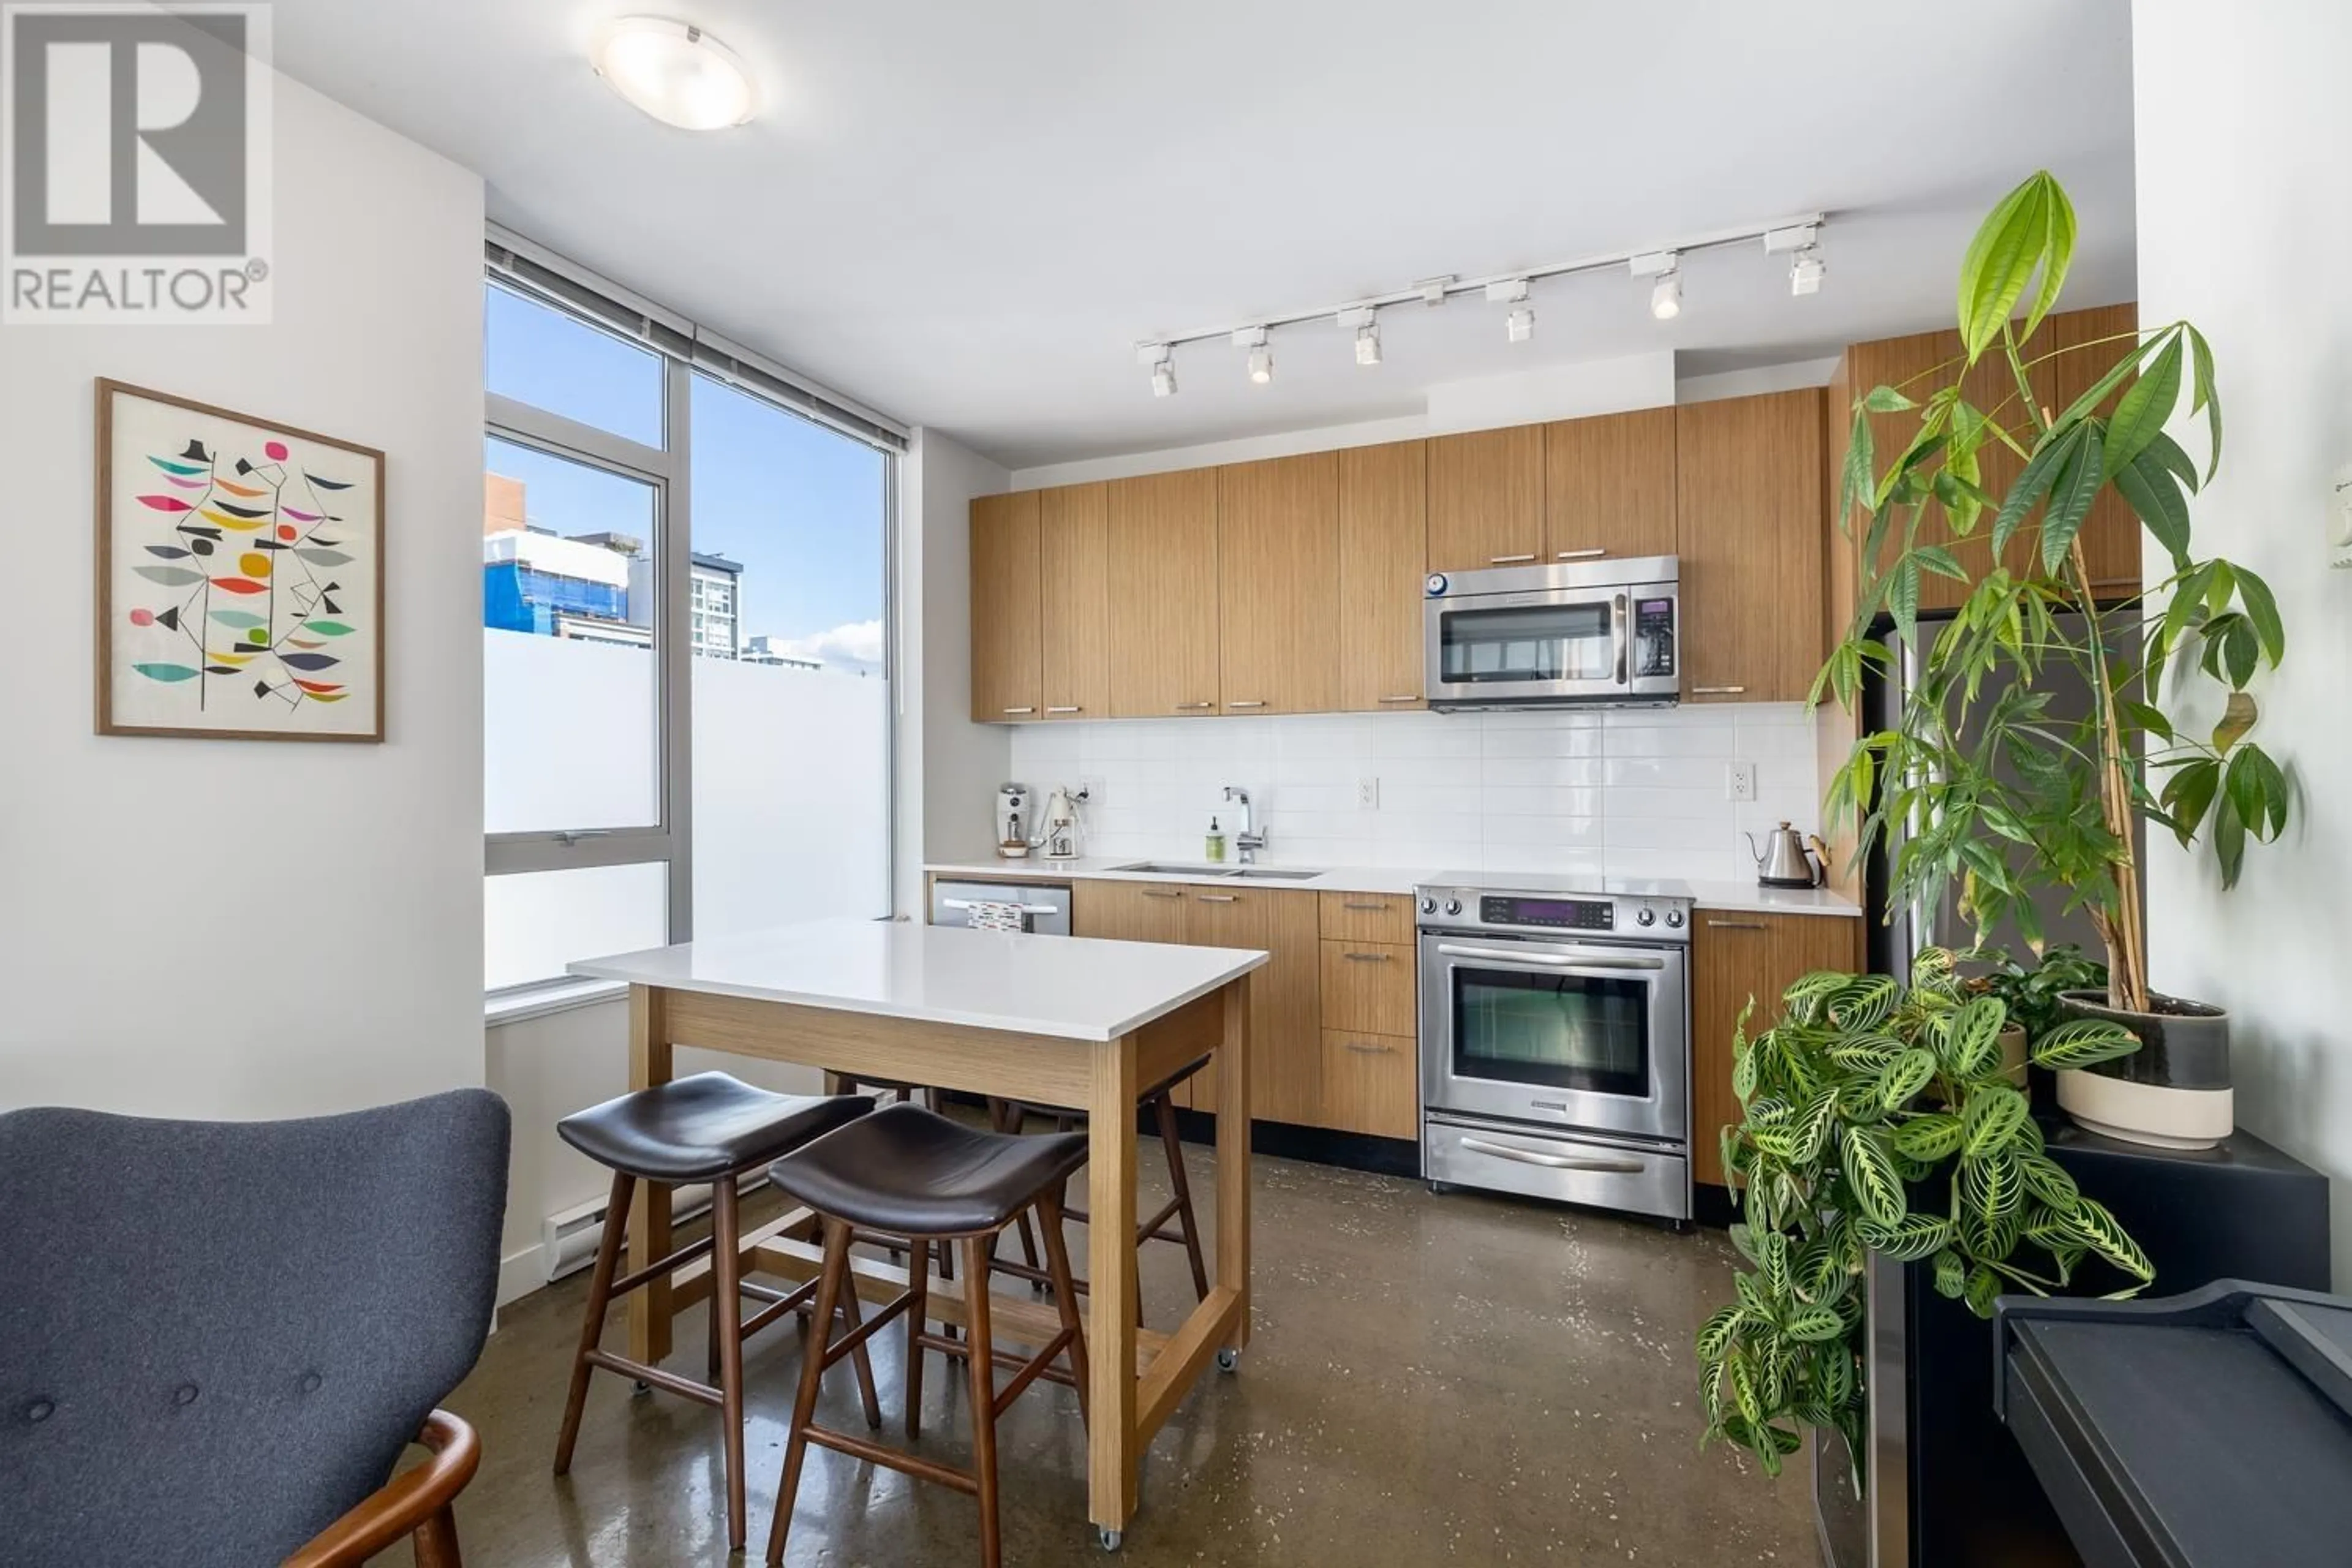 Standard kitchen for 507 221 UNION STREET, Vancouver British Columbia V6A0B4